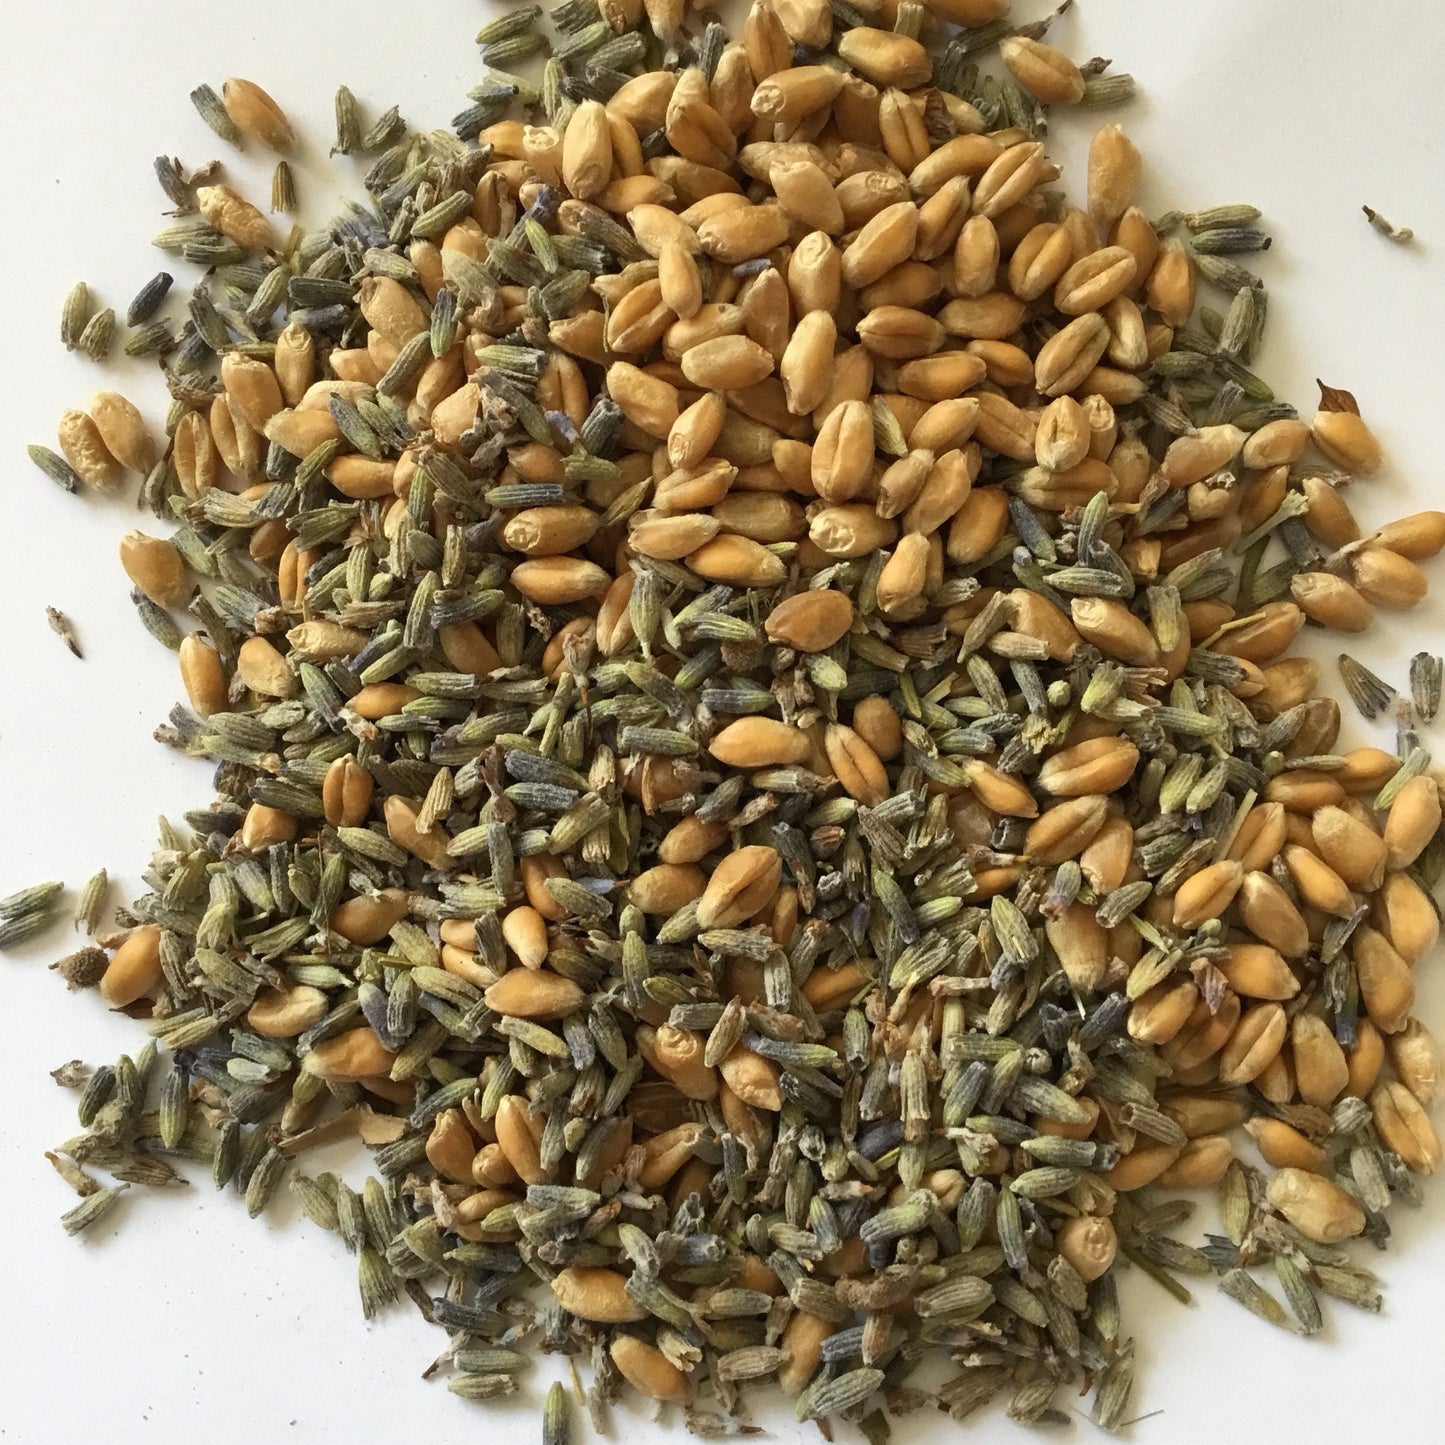 Ingredients for the lavender wheat bags